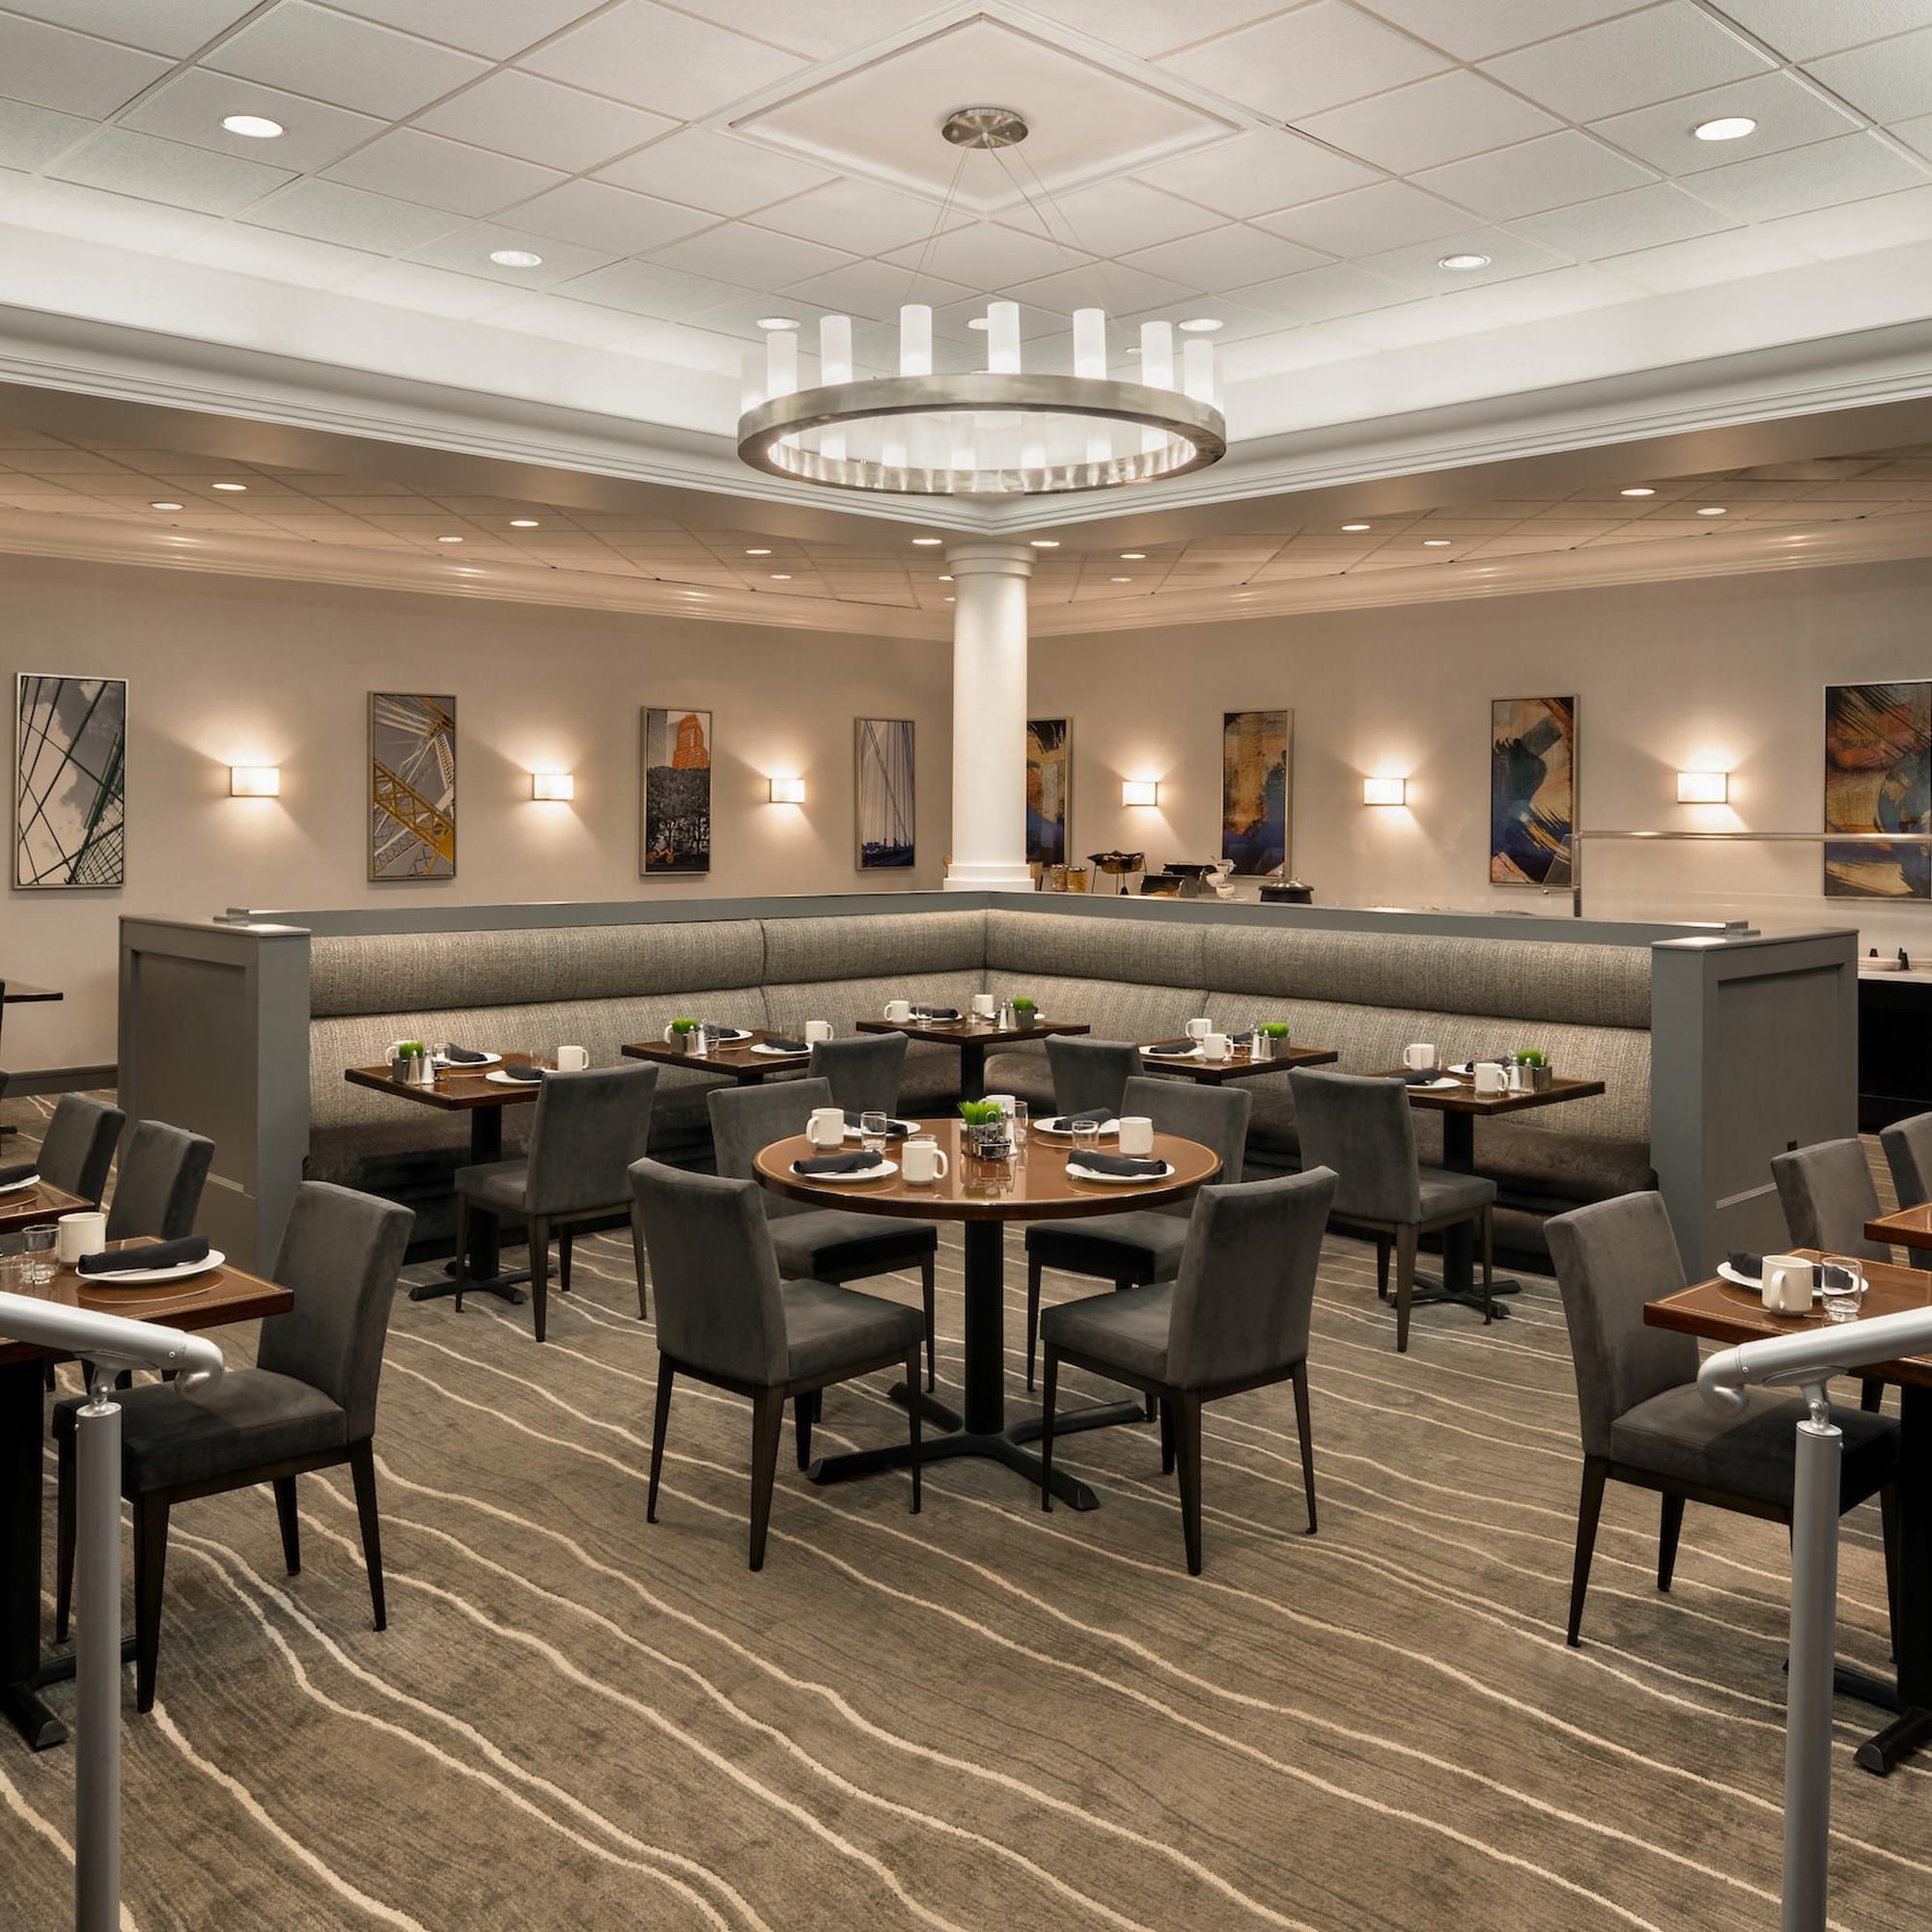 Enjoy delicious meals at our Englewood restaurant and lounge.